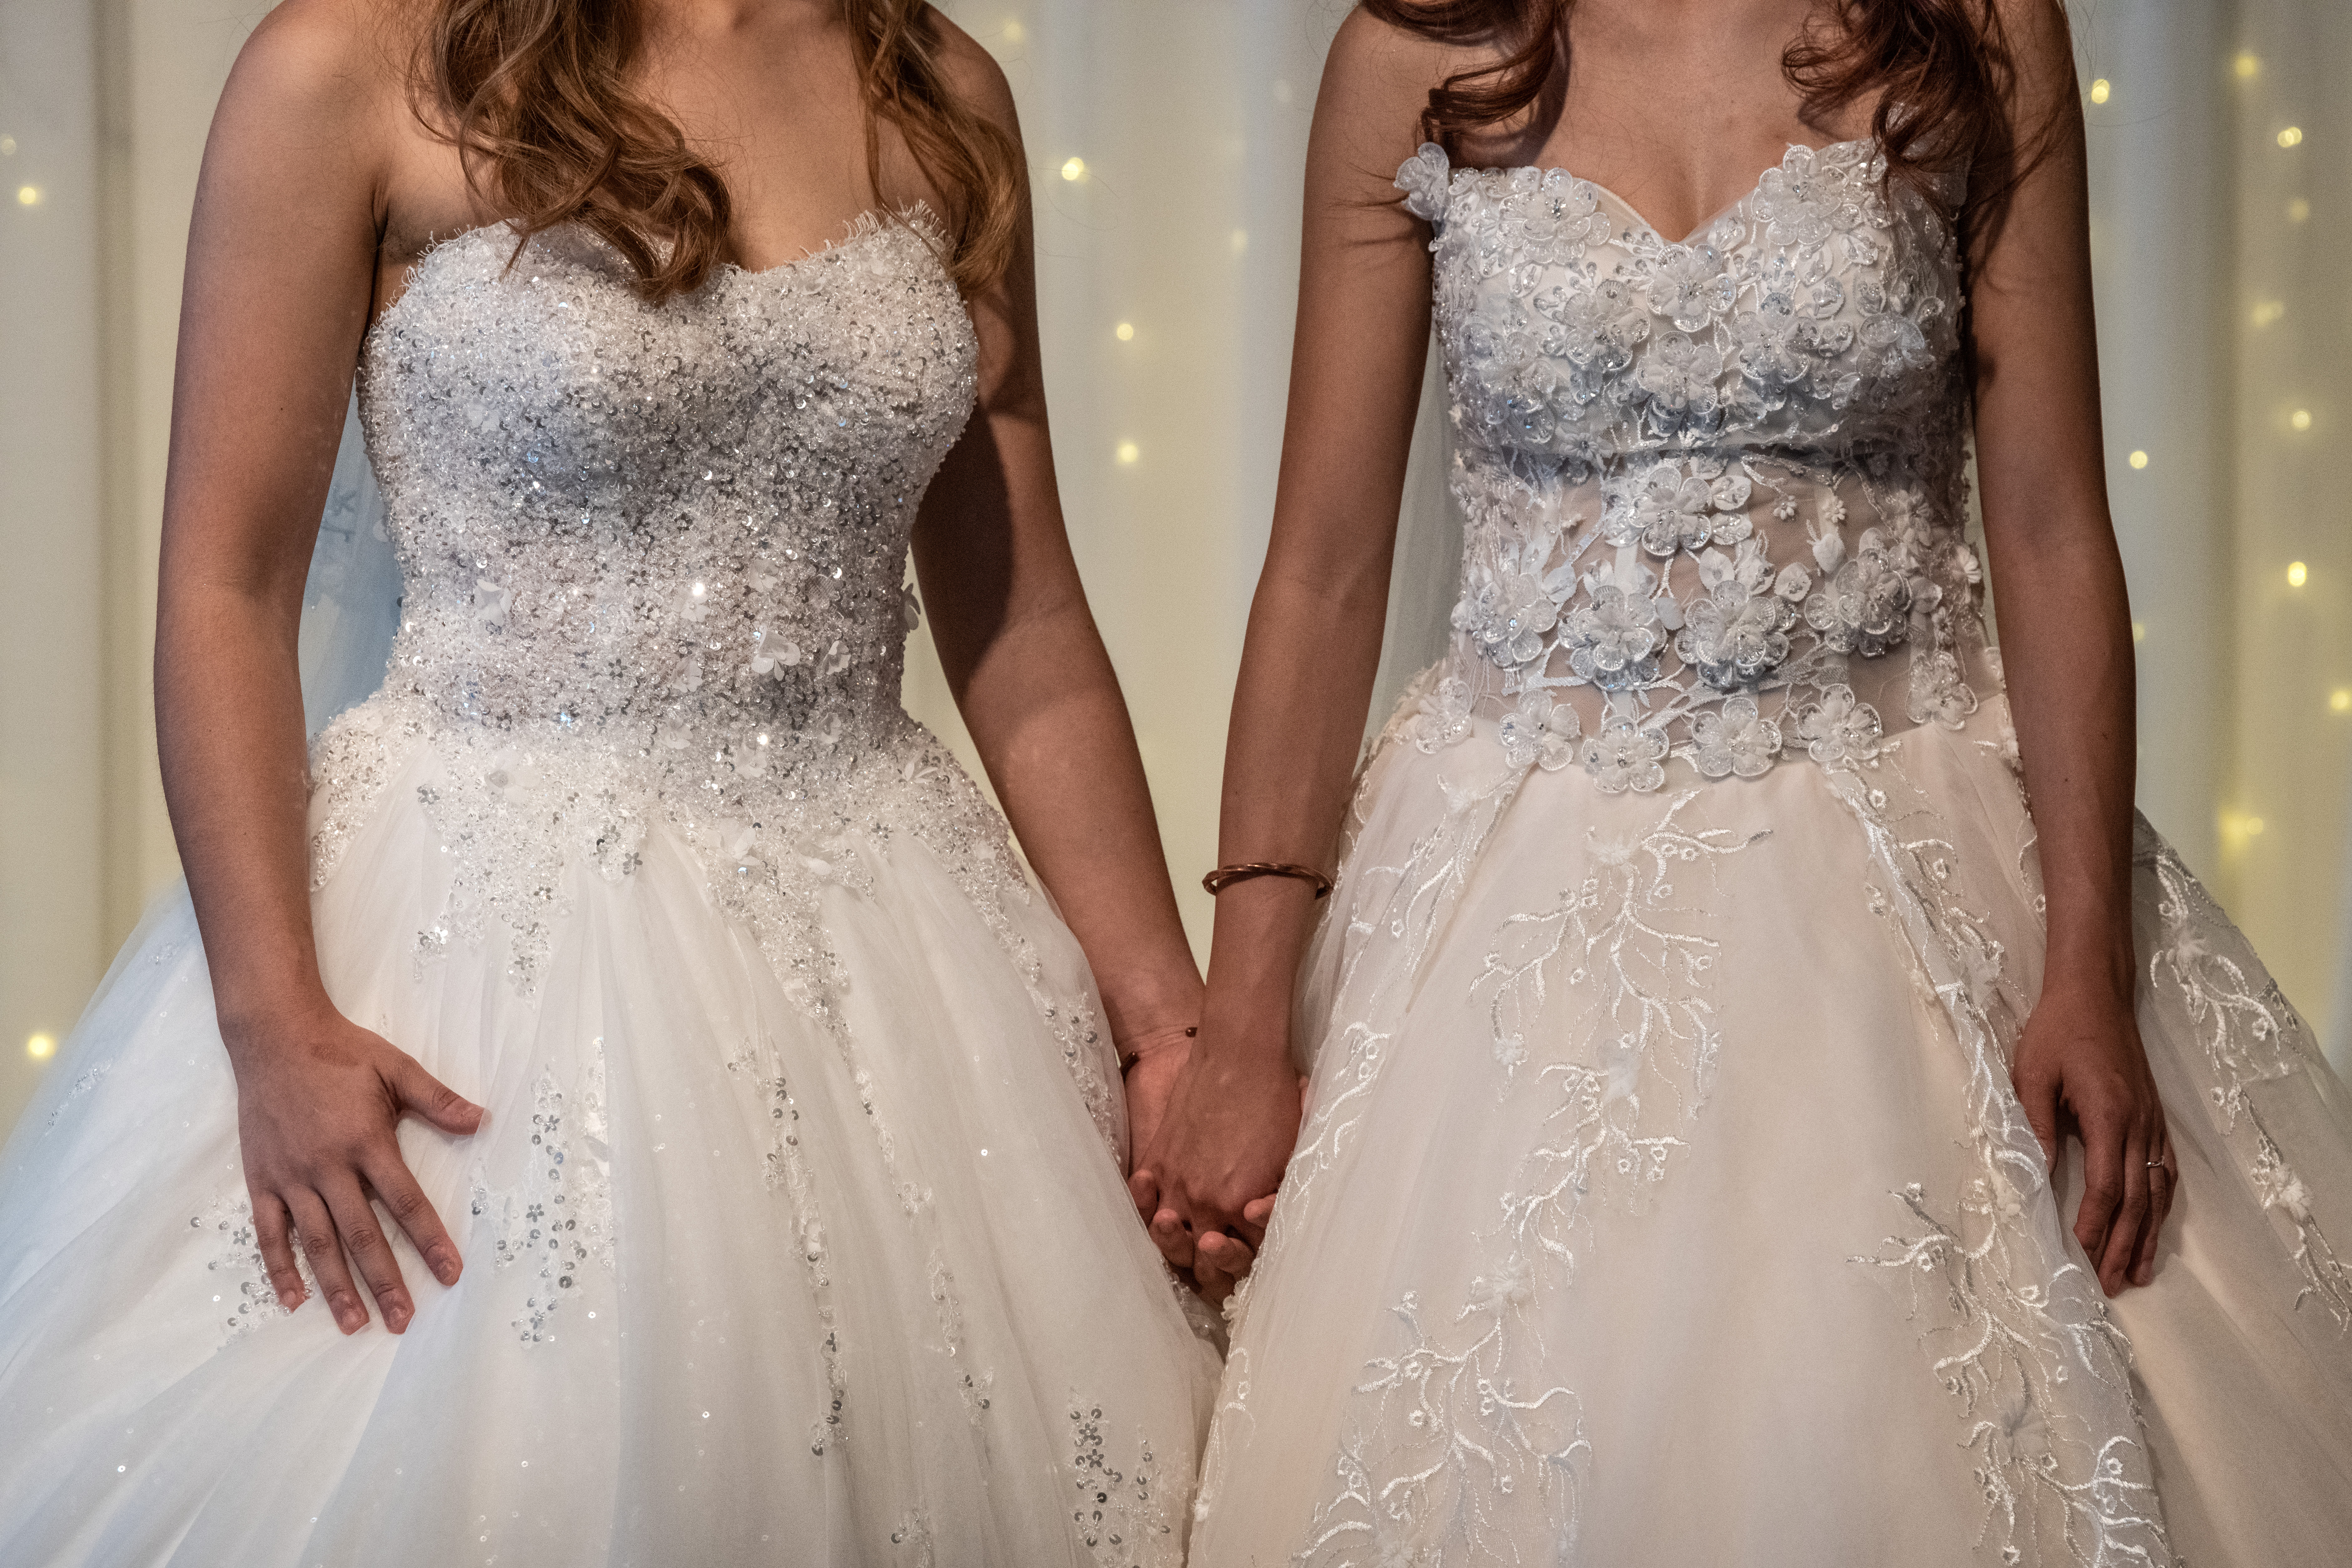 Lesbian couple hold hands wearing wedding dresses.